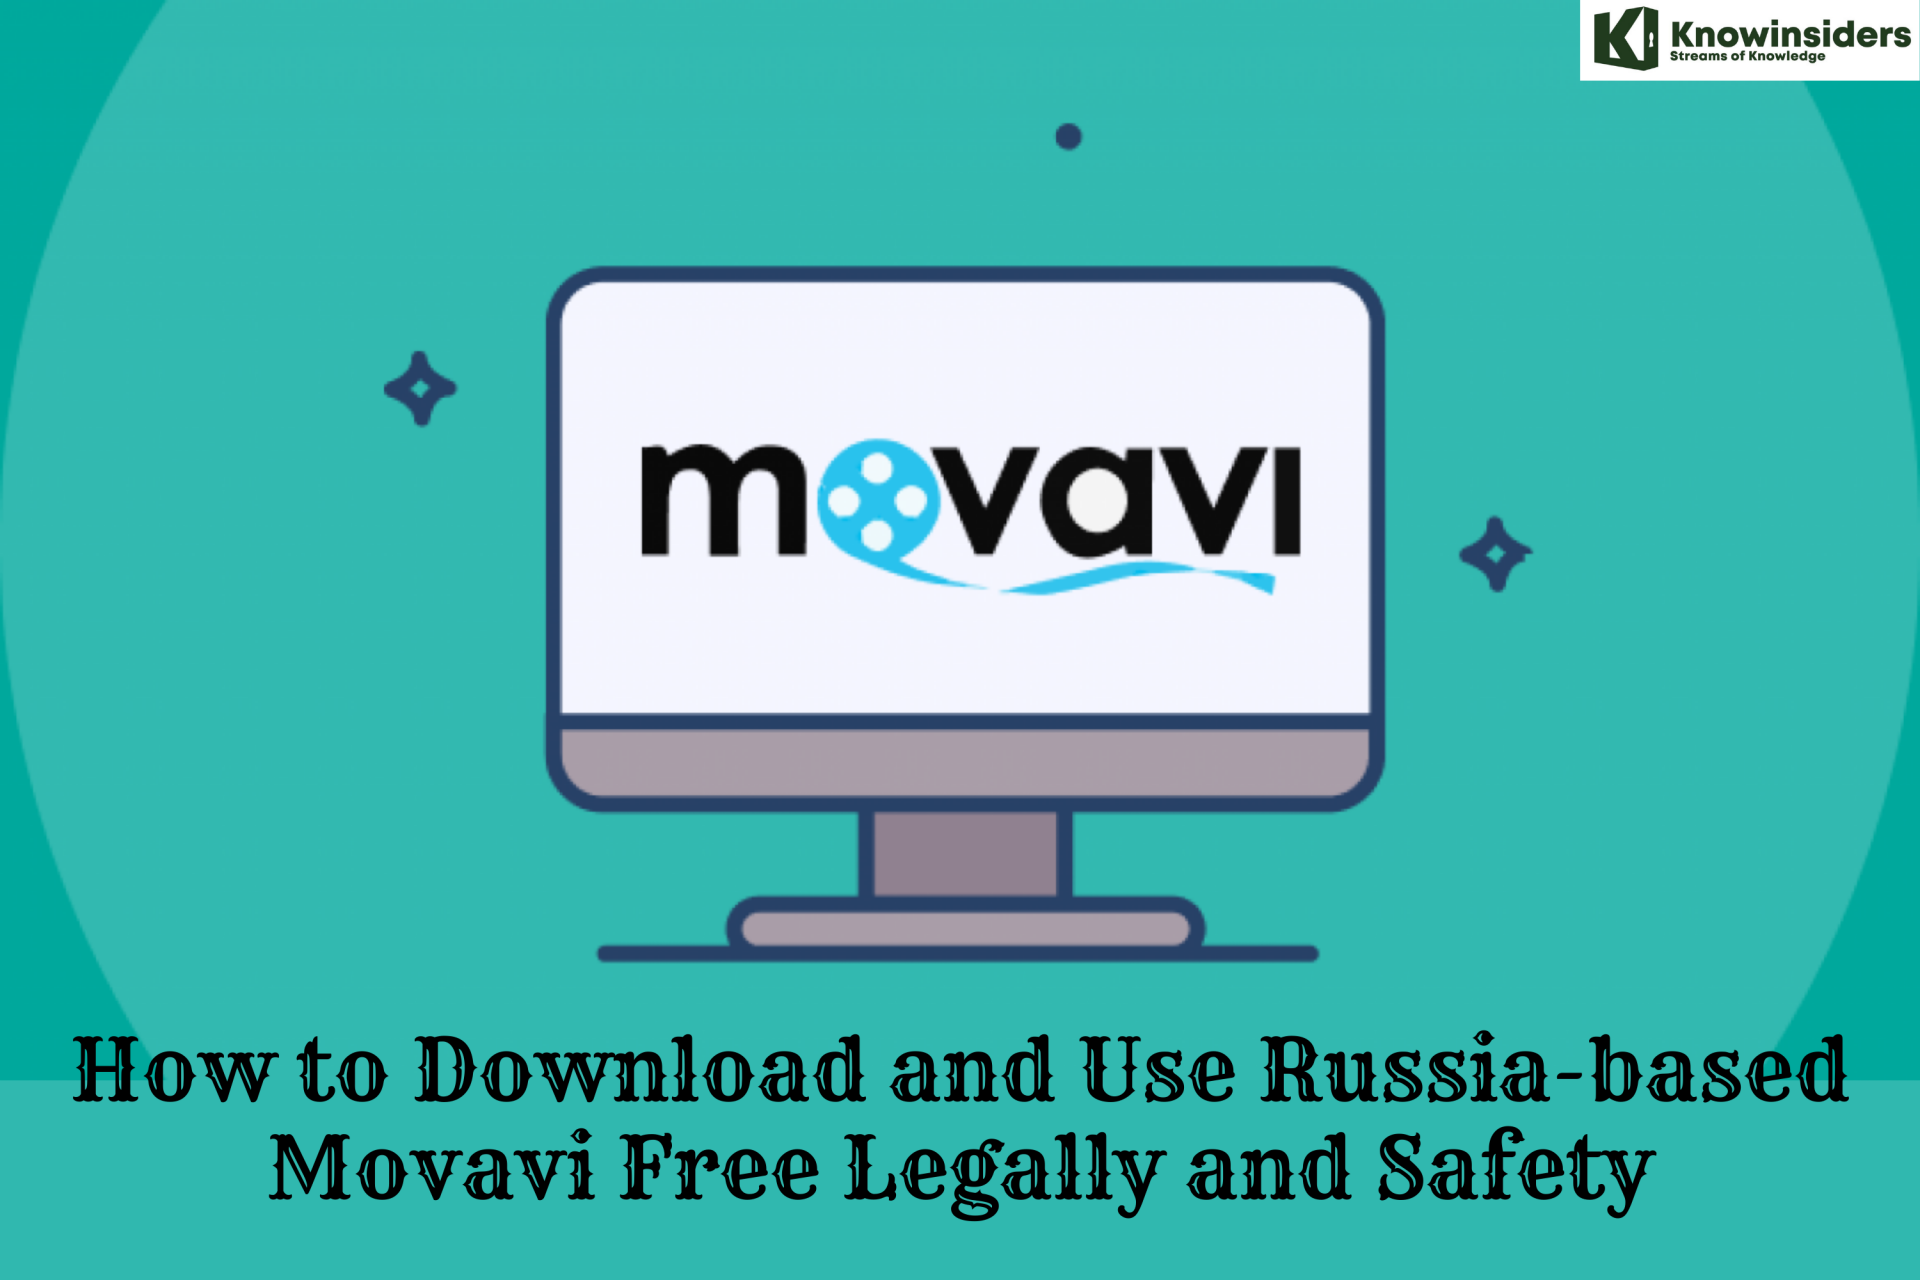 How to Download and Use Russia-based Movavi Free - Legally and Safely